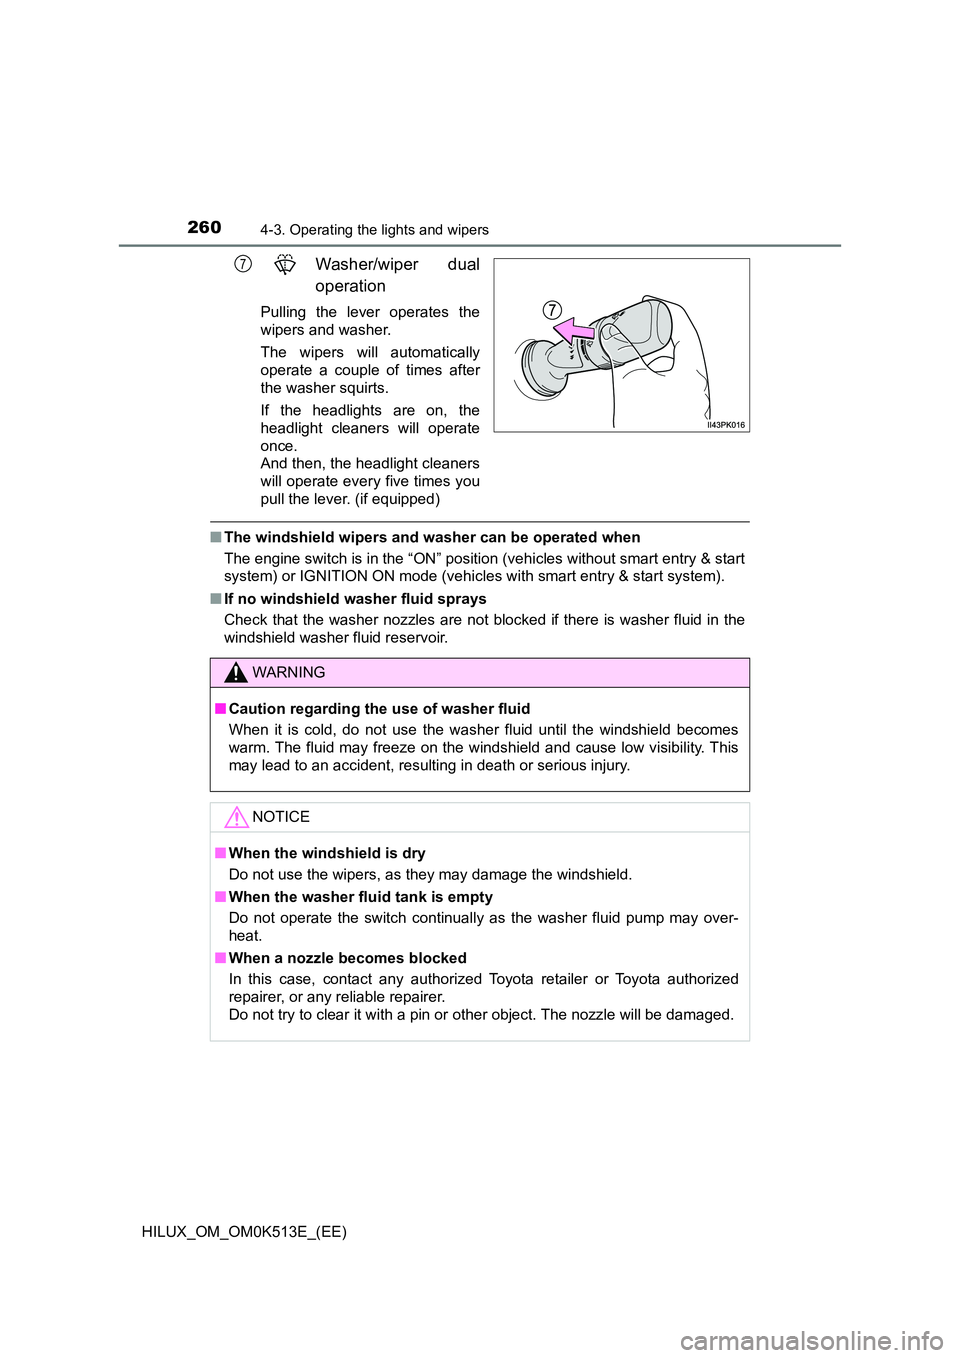 TOYOTA HILUX 2021  Owners Manual (in English) 2604-3. Operating the lights and wipers
HILUX_OM_OM0K513E_(EE)
Washer/wiper dual 
operation
Pulling the lever operates the 
wipers and washer. 
The wipers will automatically 
operate a couple of times